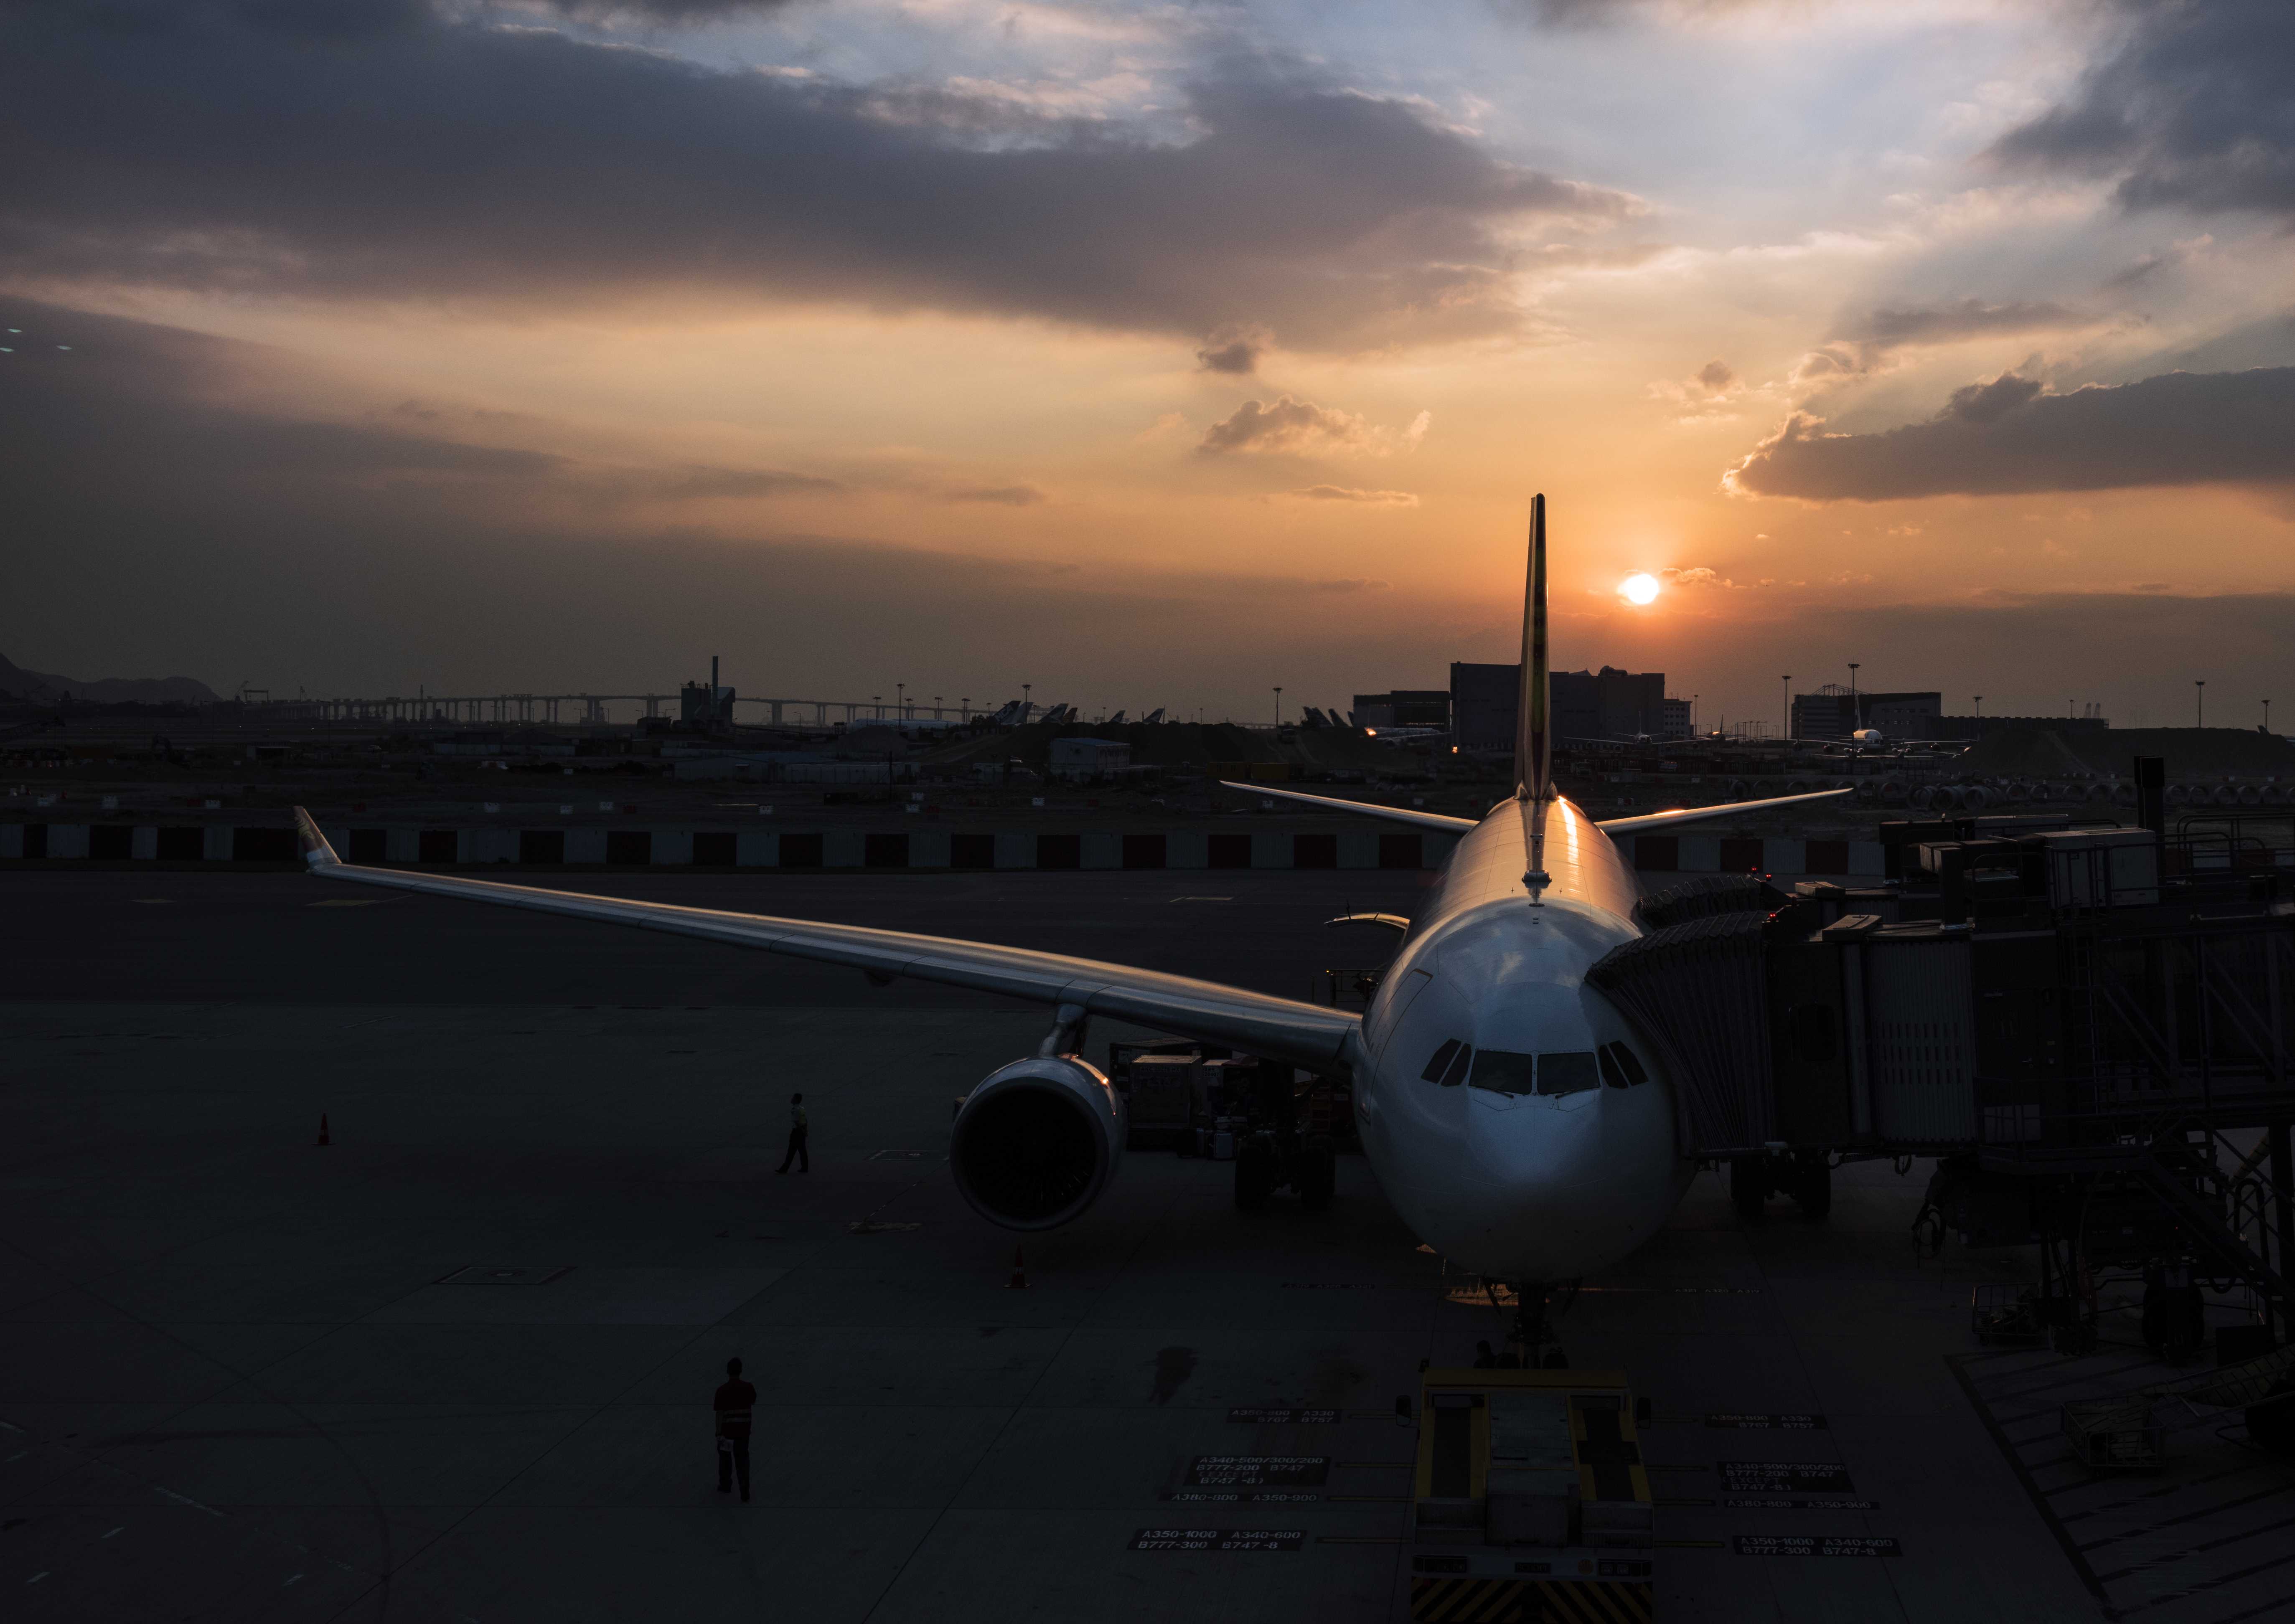 An airplane parked at an airport gate during sunset, with a dramatic sky and a runway in the background.